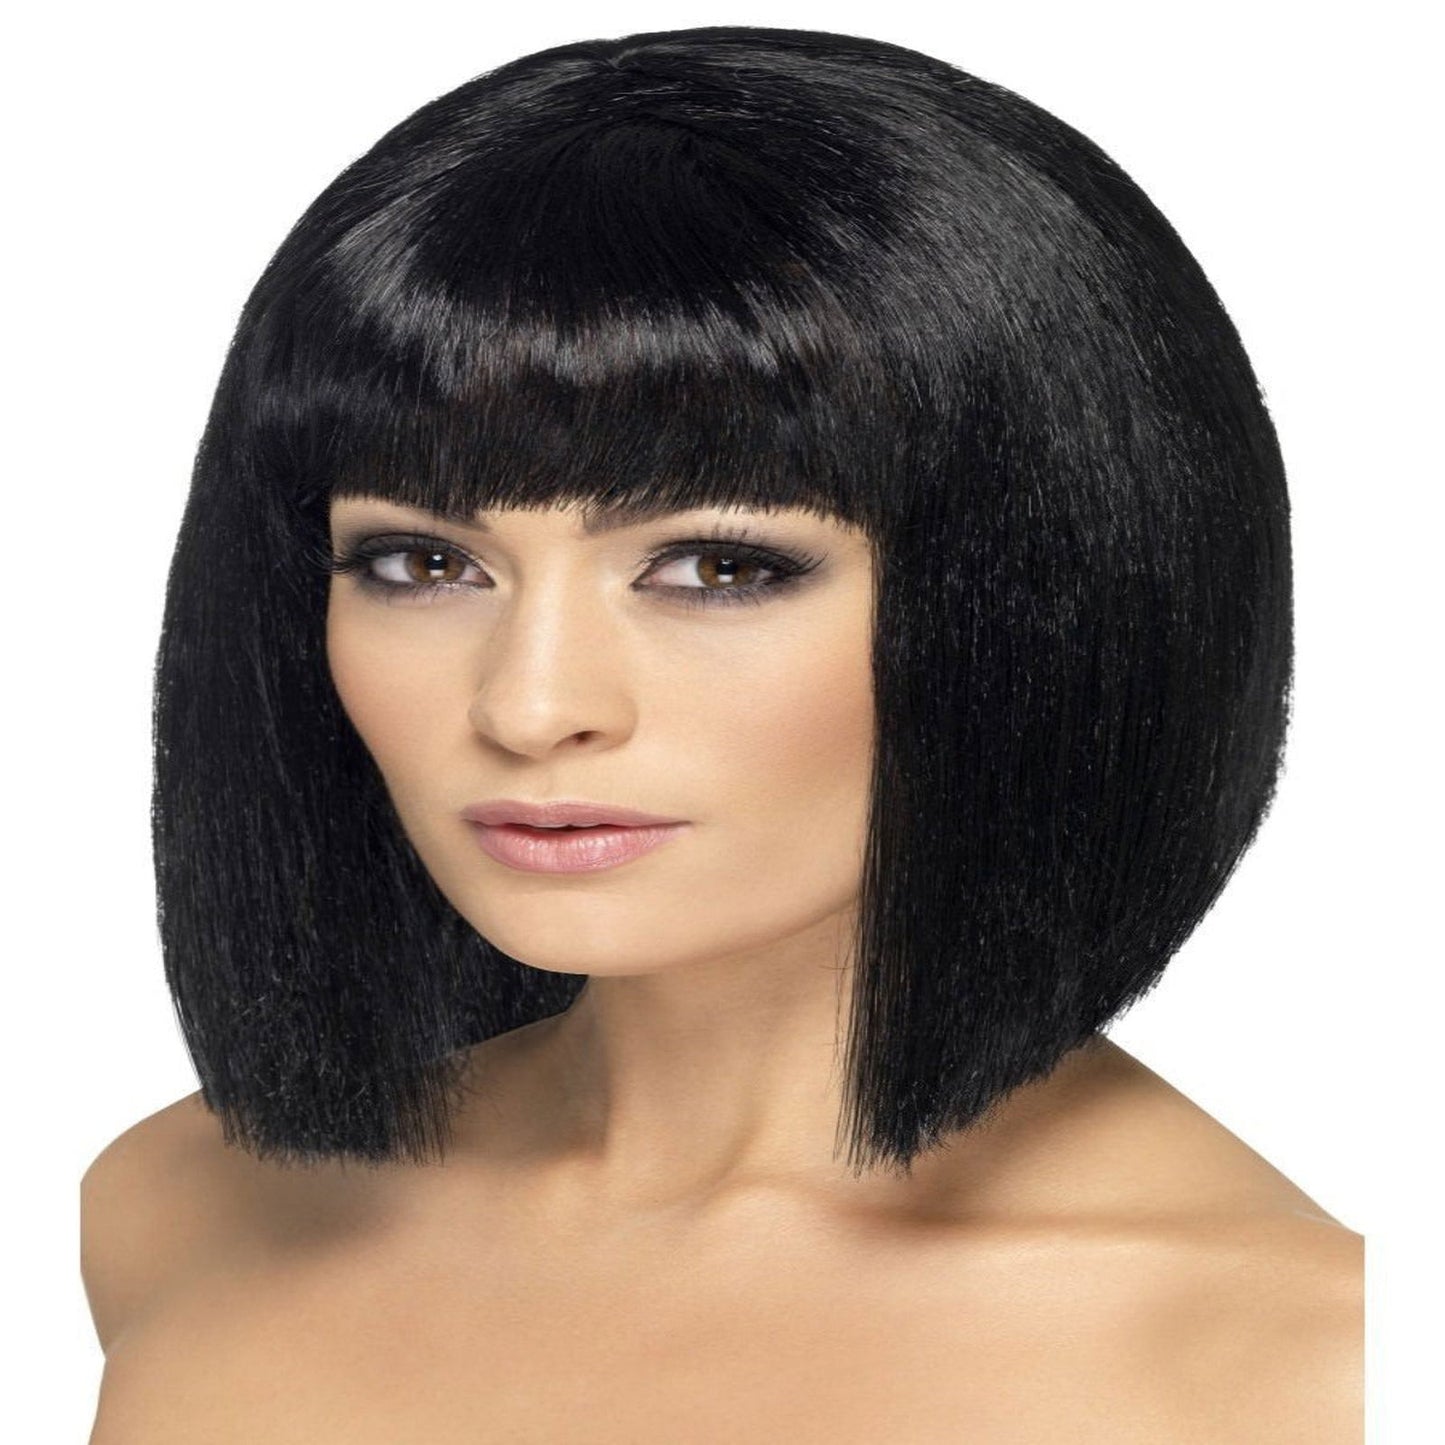 Womens Black Coquette Bob Style Dress Wig With A Short Fringe | Merthyr Tydfil | Why Not Shop Online